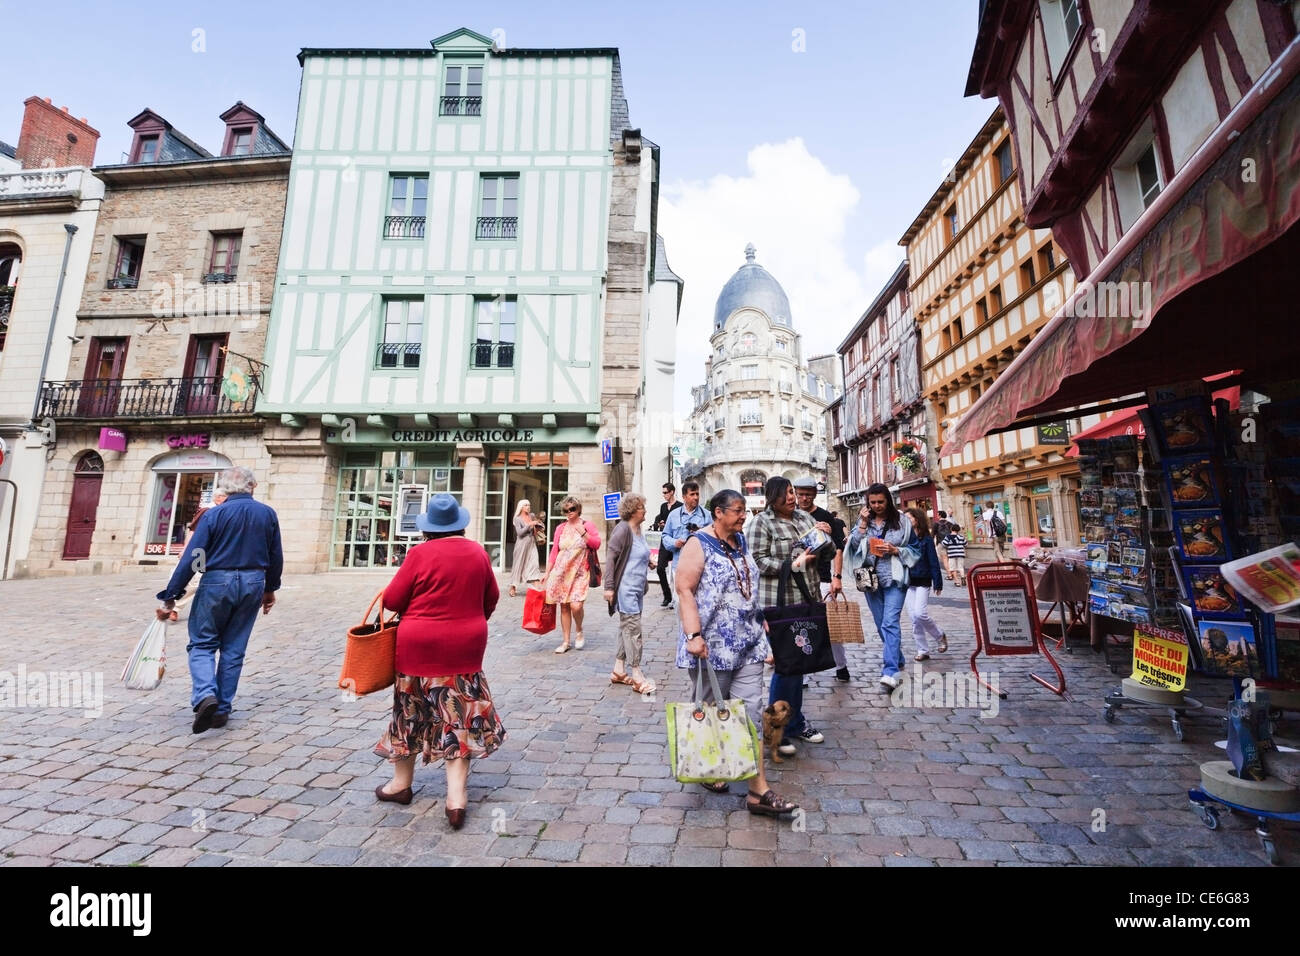 Vannes, Brittany, France, one of the country's finest medieval cities. This is the centre of the old town. Stock Photo